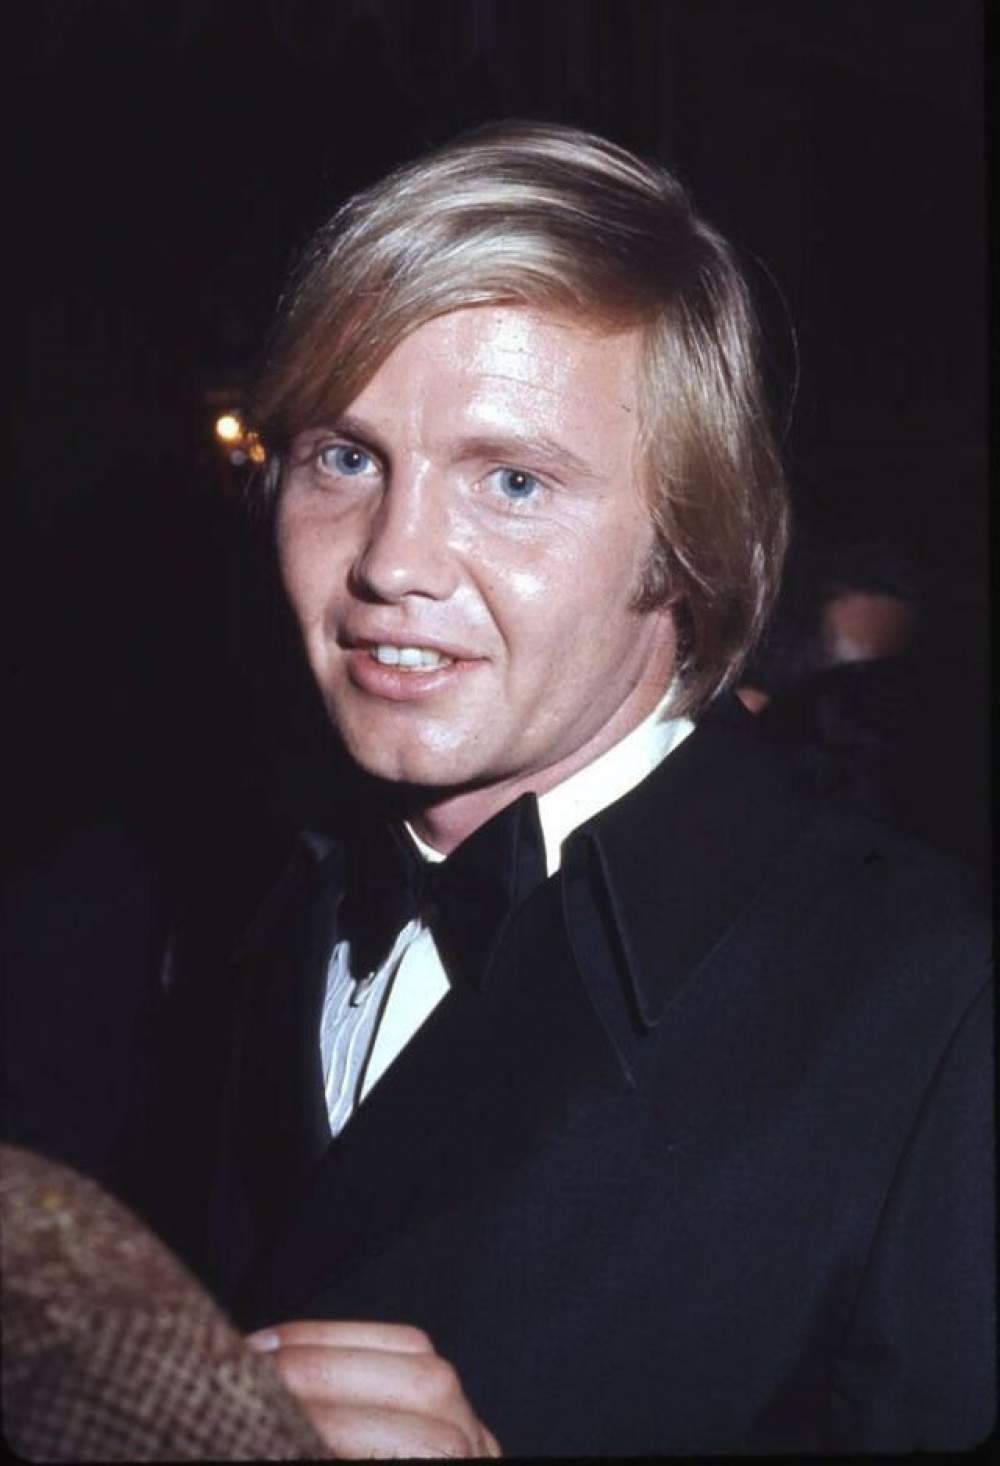 Young Jon Voight showcased at his prime. Wallpaper